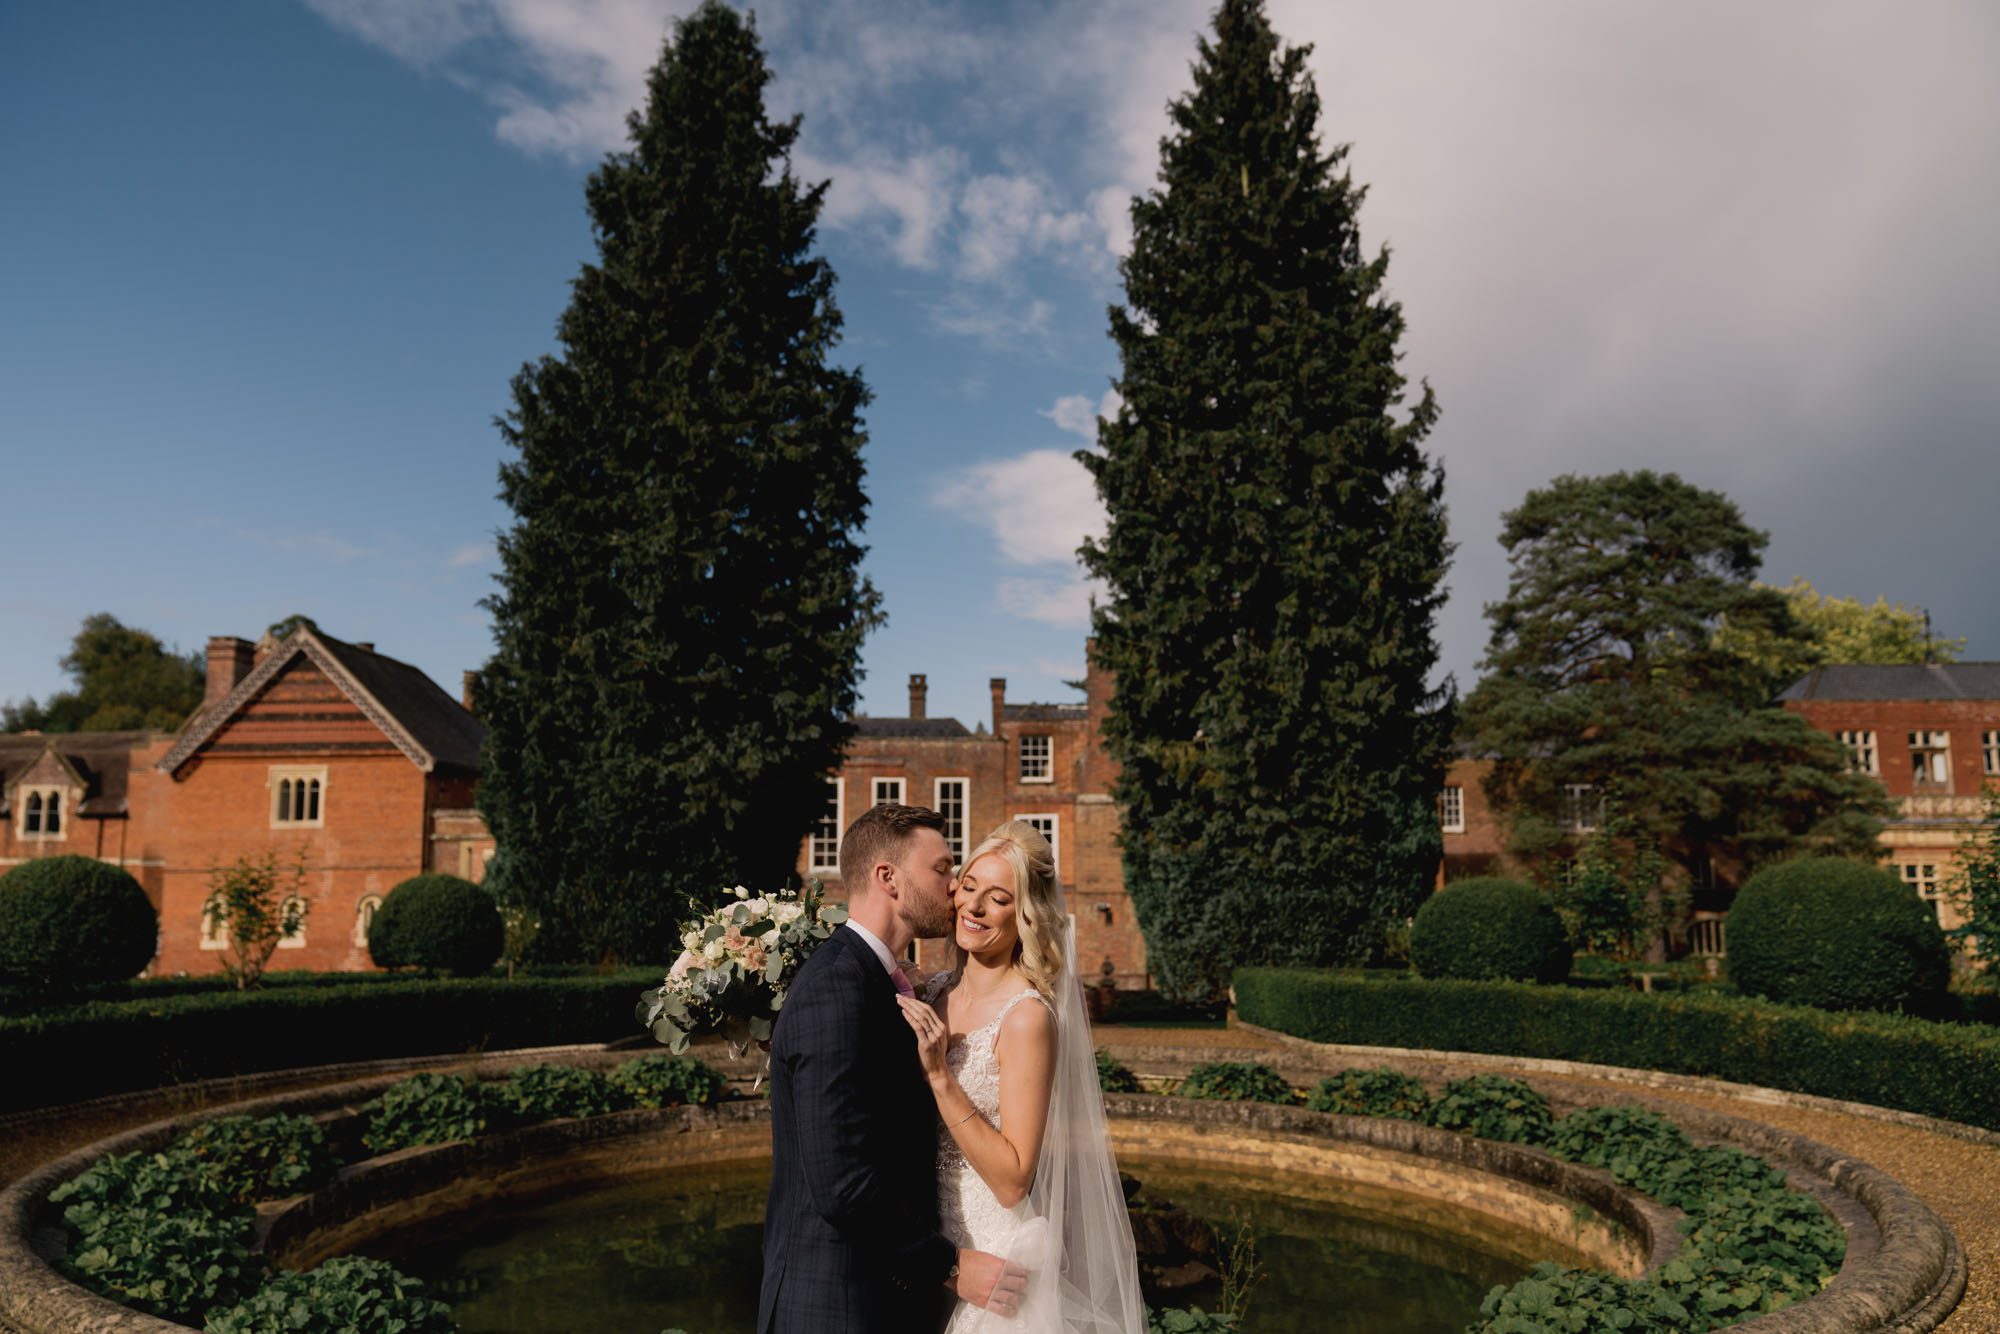 Bride and groom kiss on their wedding day at Wotton House.